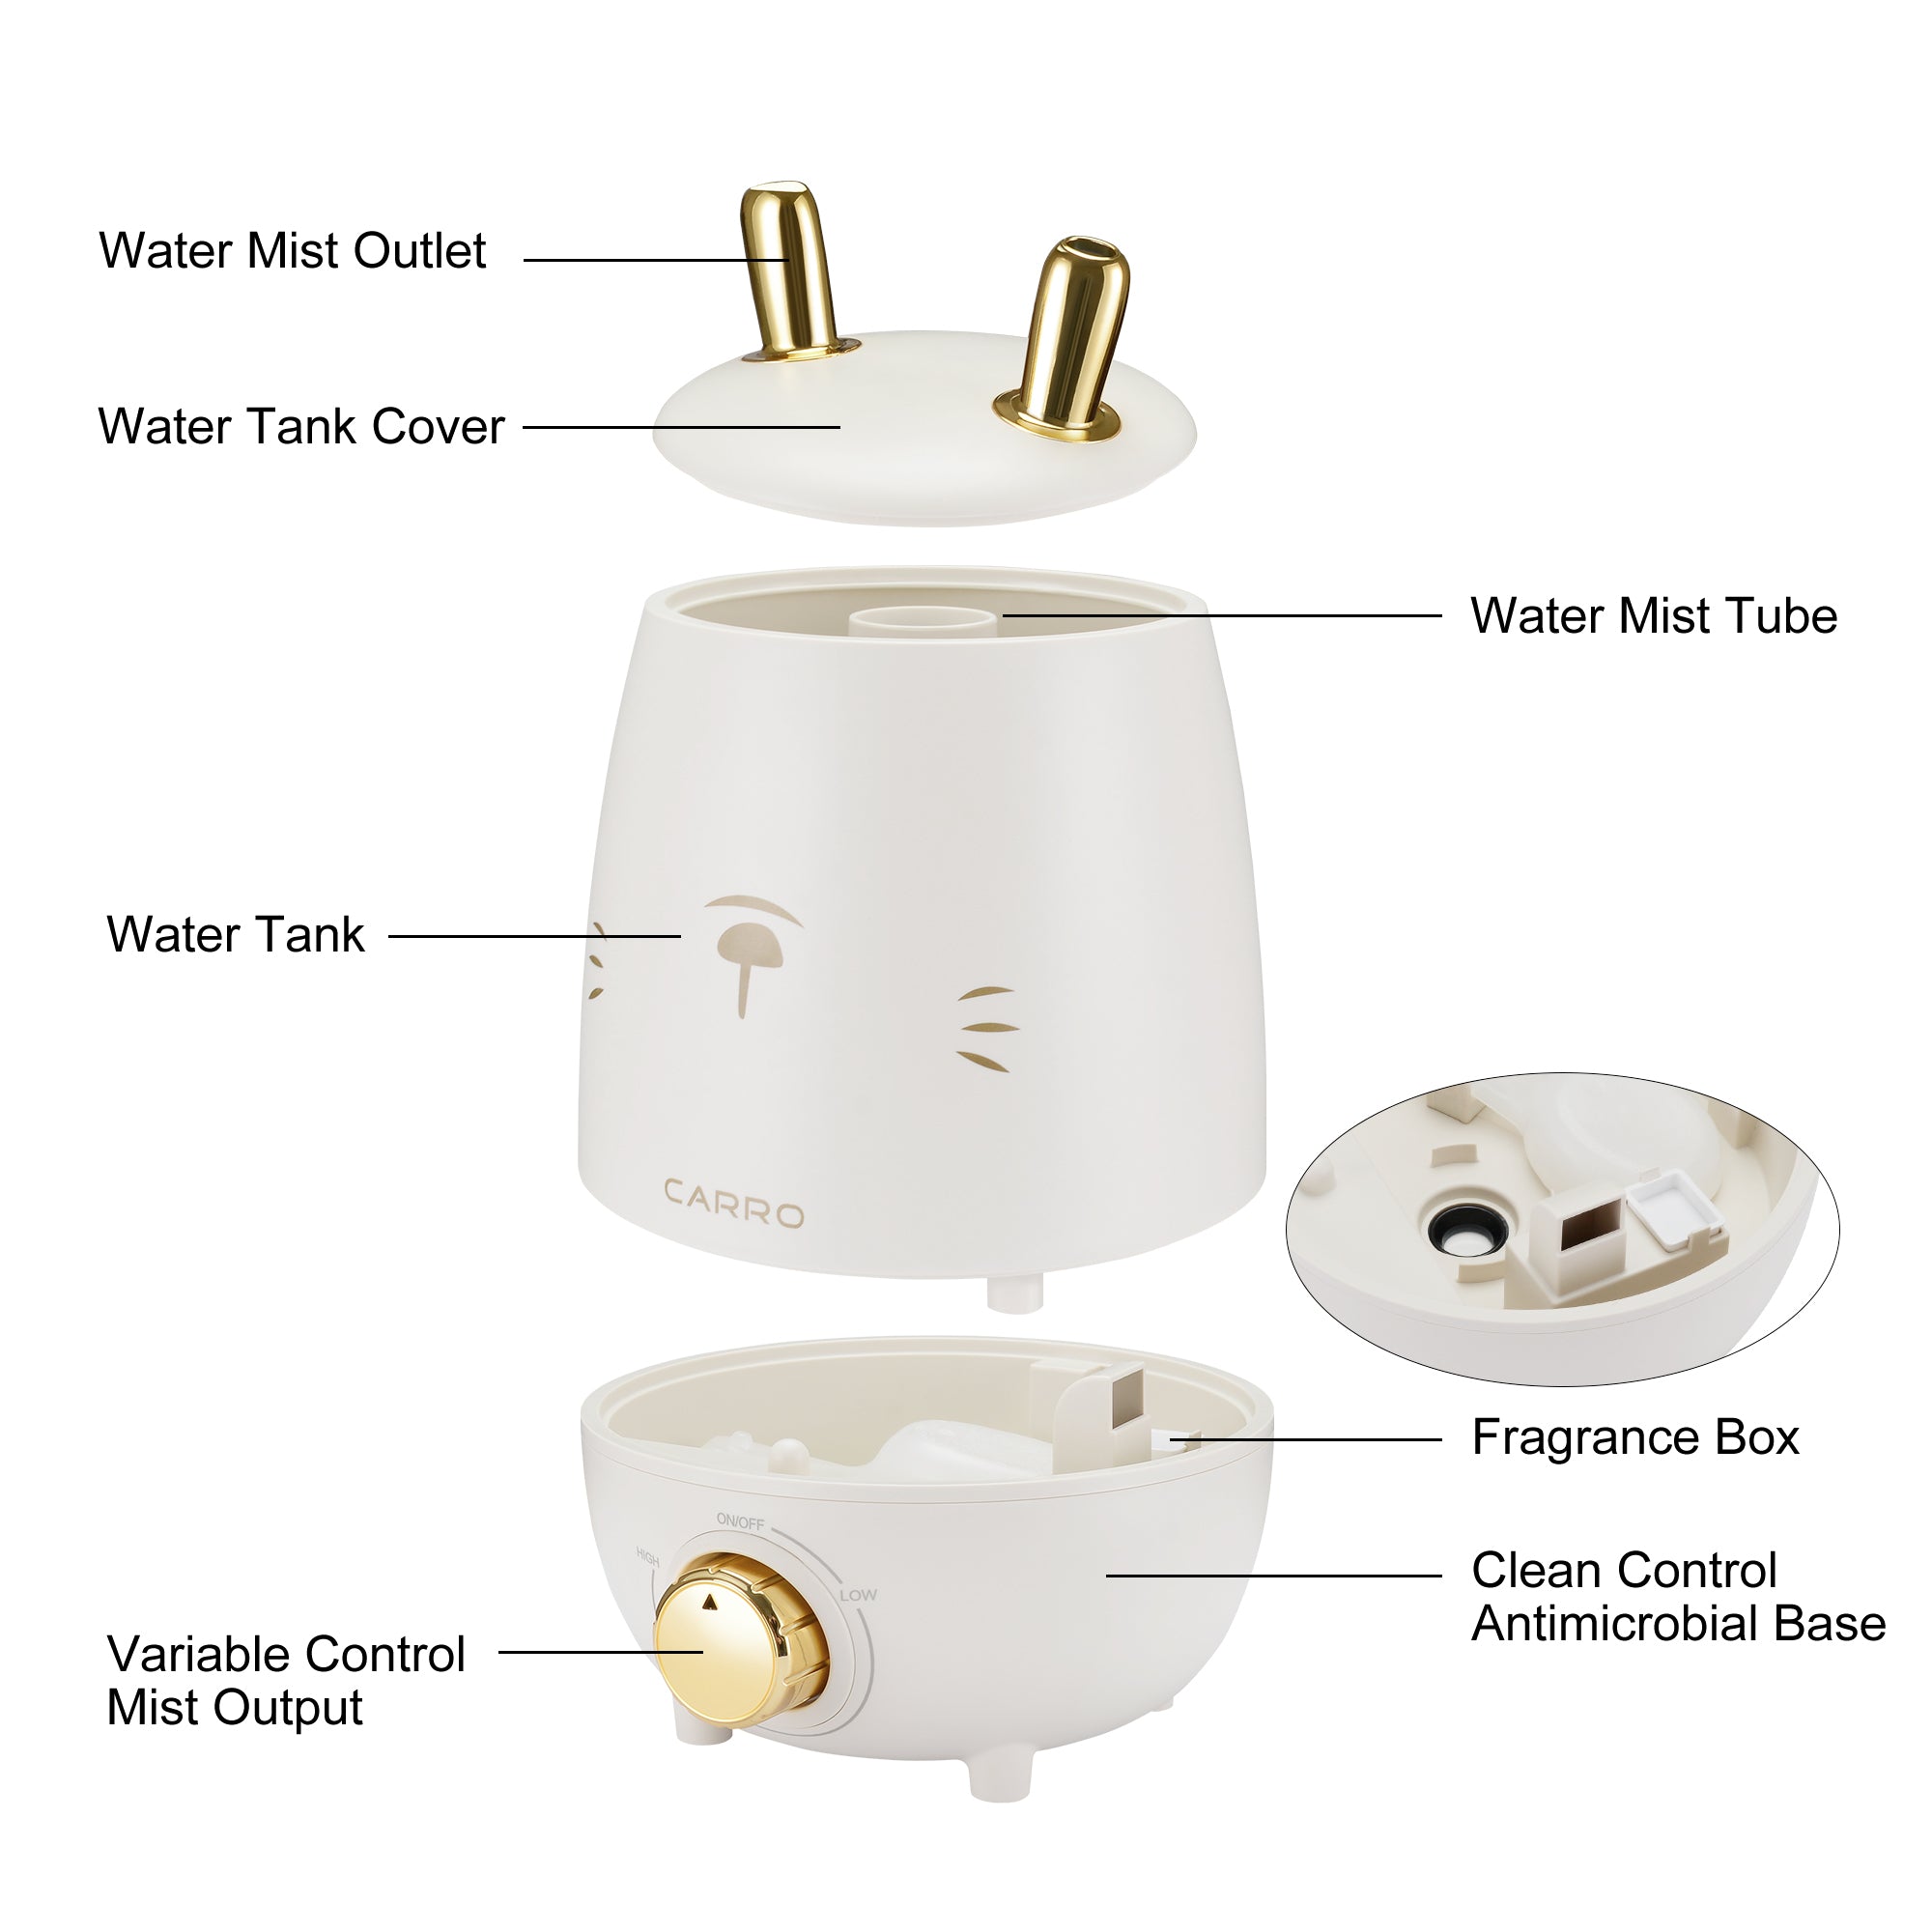 The humidifier is equipped with double lovely bunny-ear-shape Atomization Outlets and variable mist control rotary switch. A low water indicator light lets you know when it&#39;s time to refill the water tank. Carro humidifier creates a better home environment for those suffering from colds, allergies and dry skin.